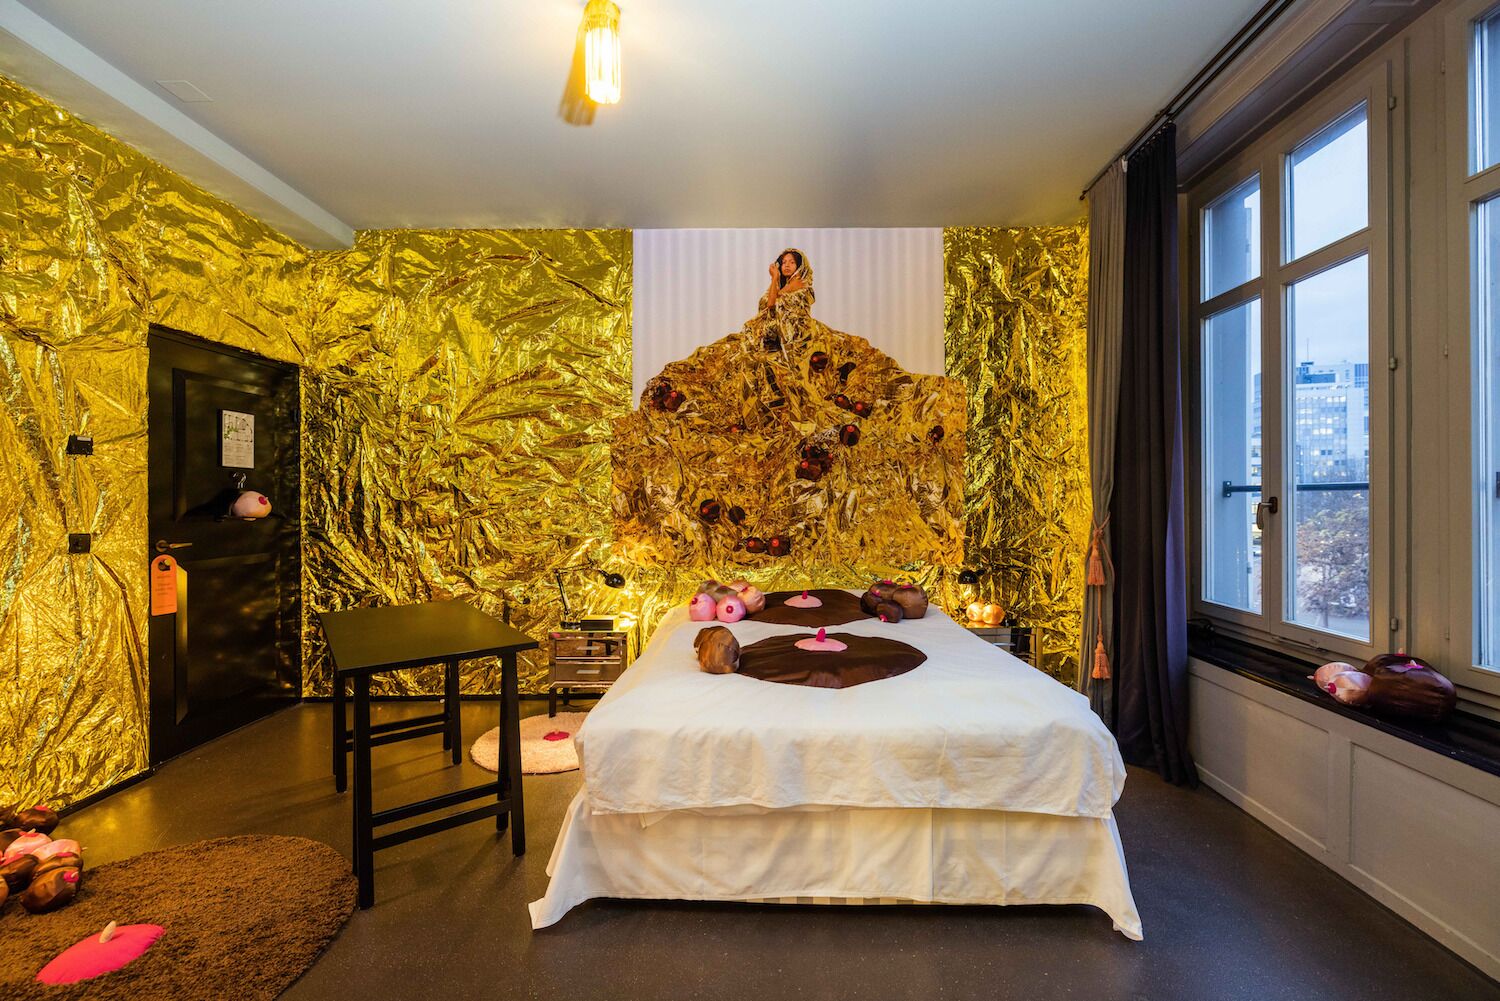 Pop-up hotel room in Zurich Switzerland decorated with nipple cushions and gold leaves on the walls